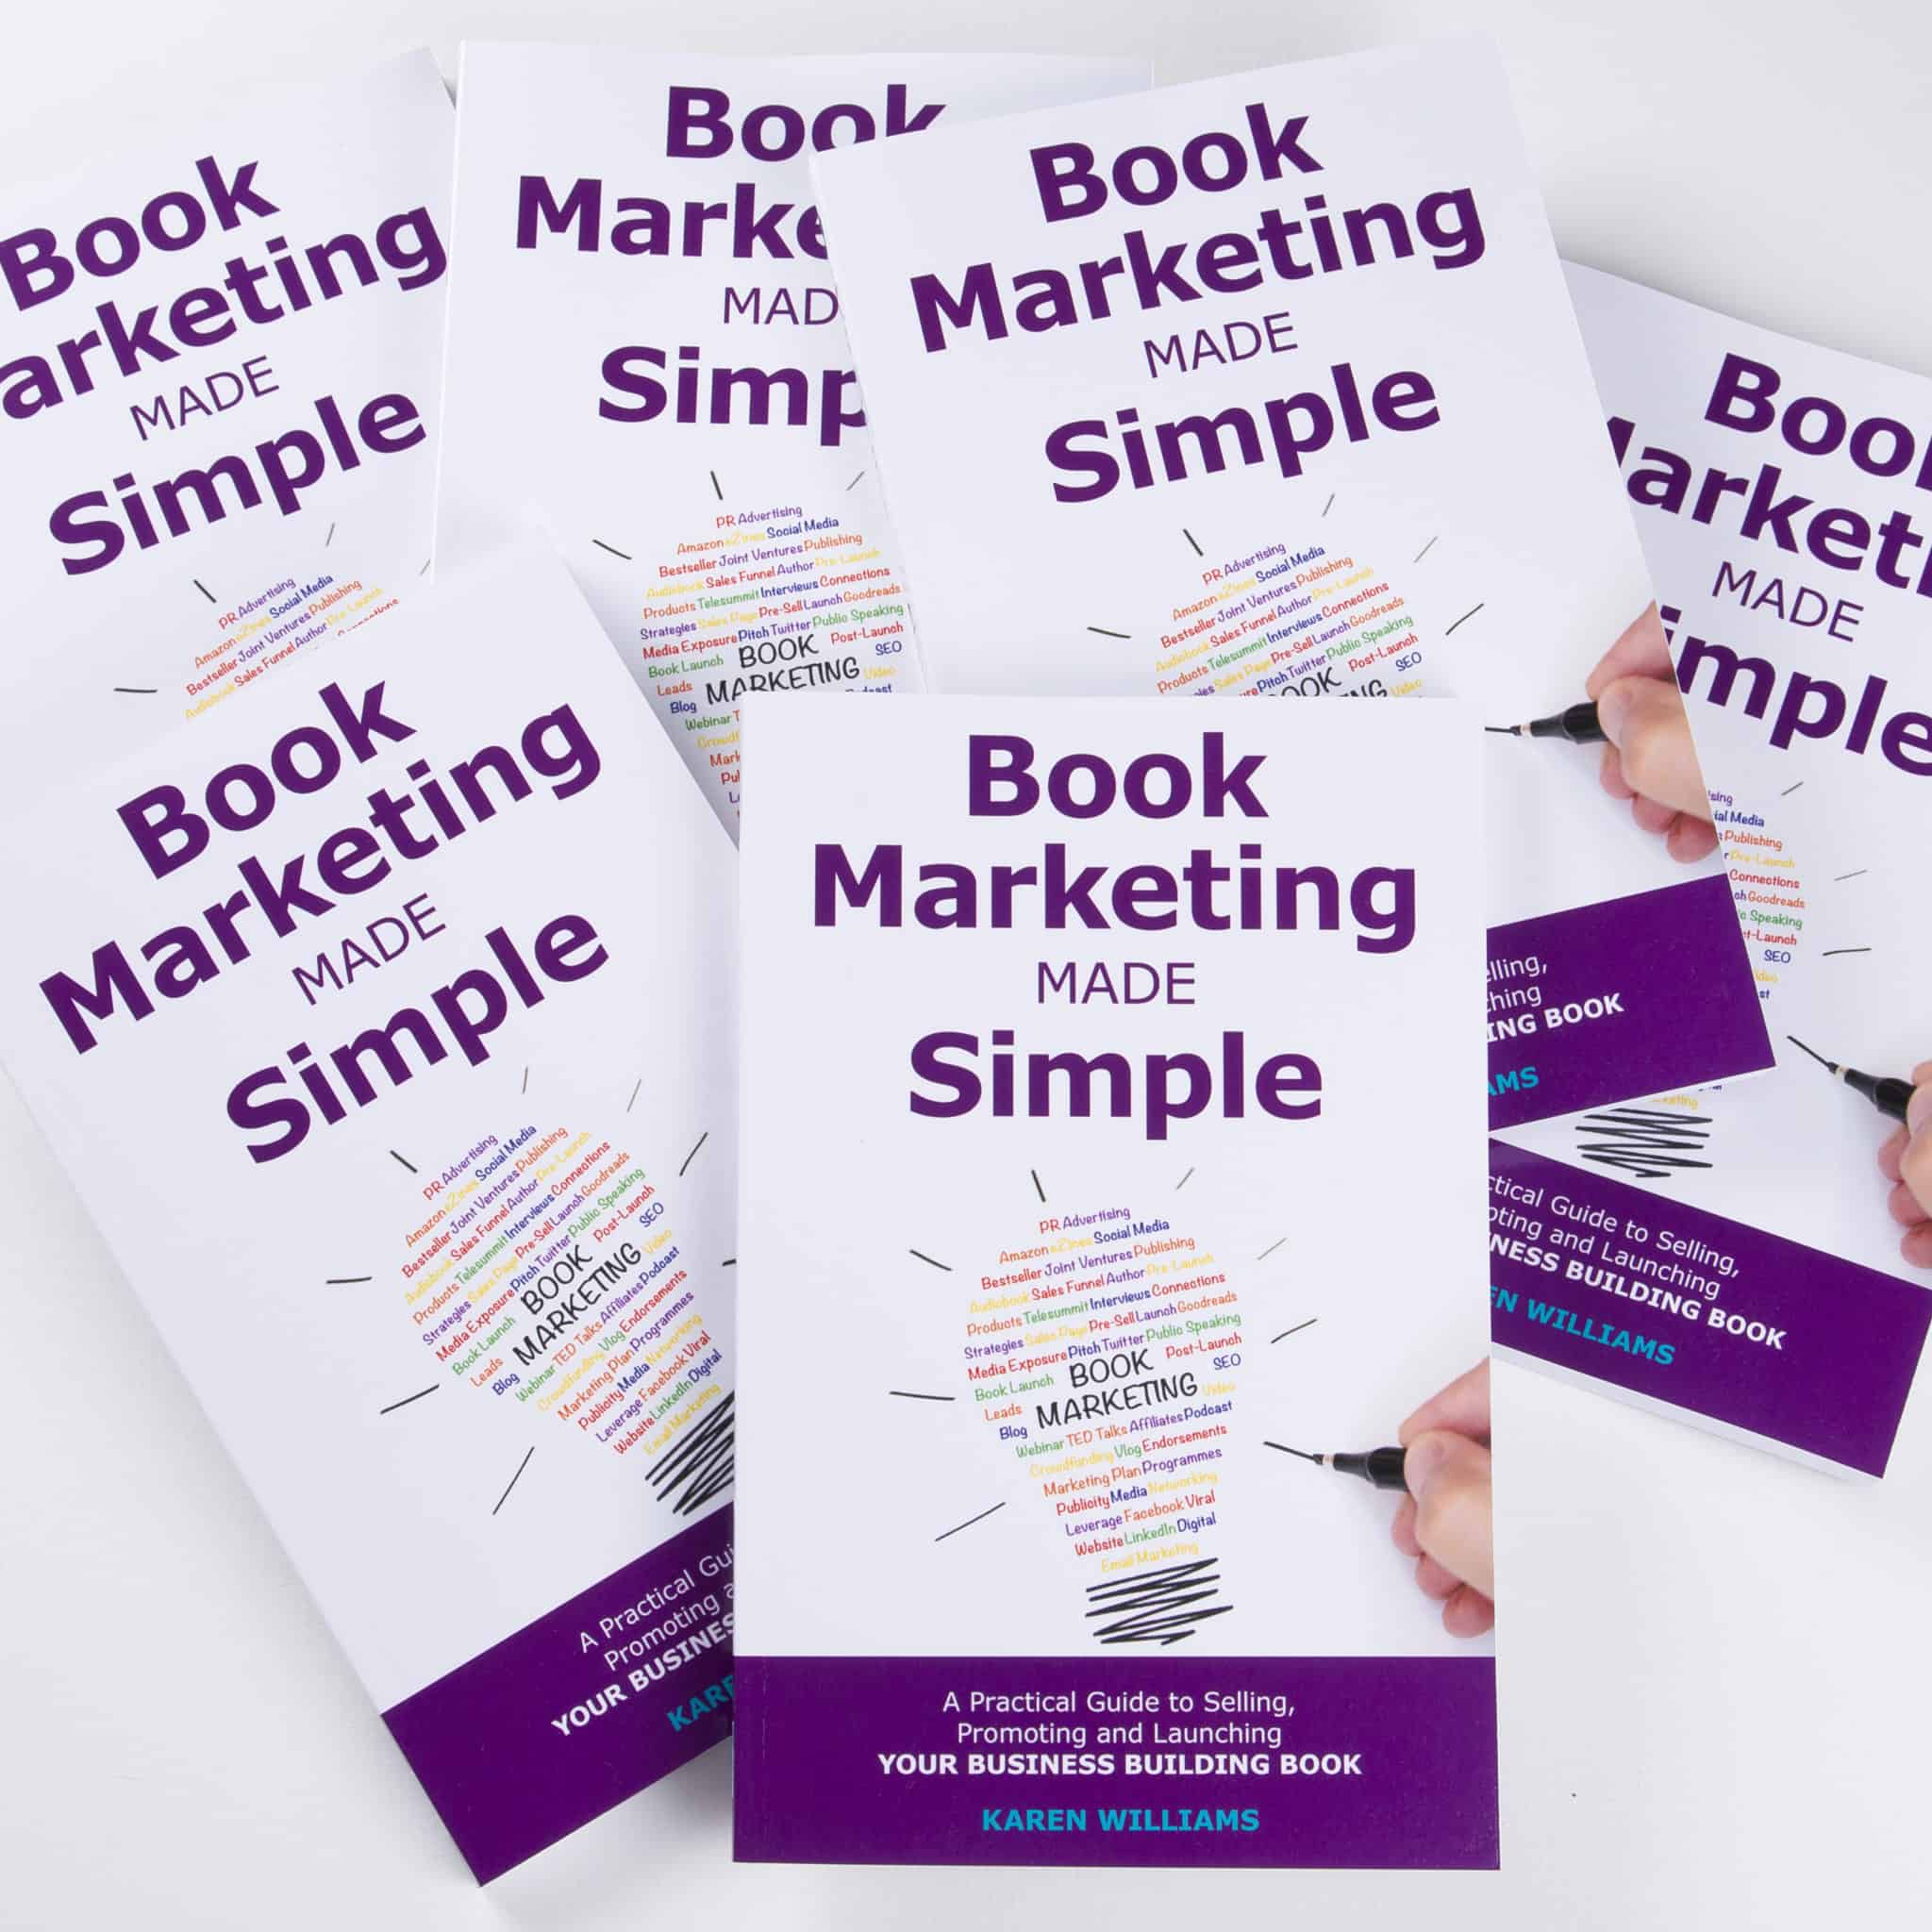 Book Marketing Made Simple by Karen Williams Author